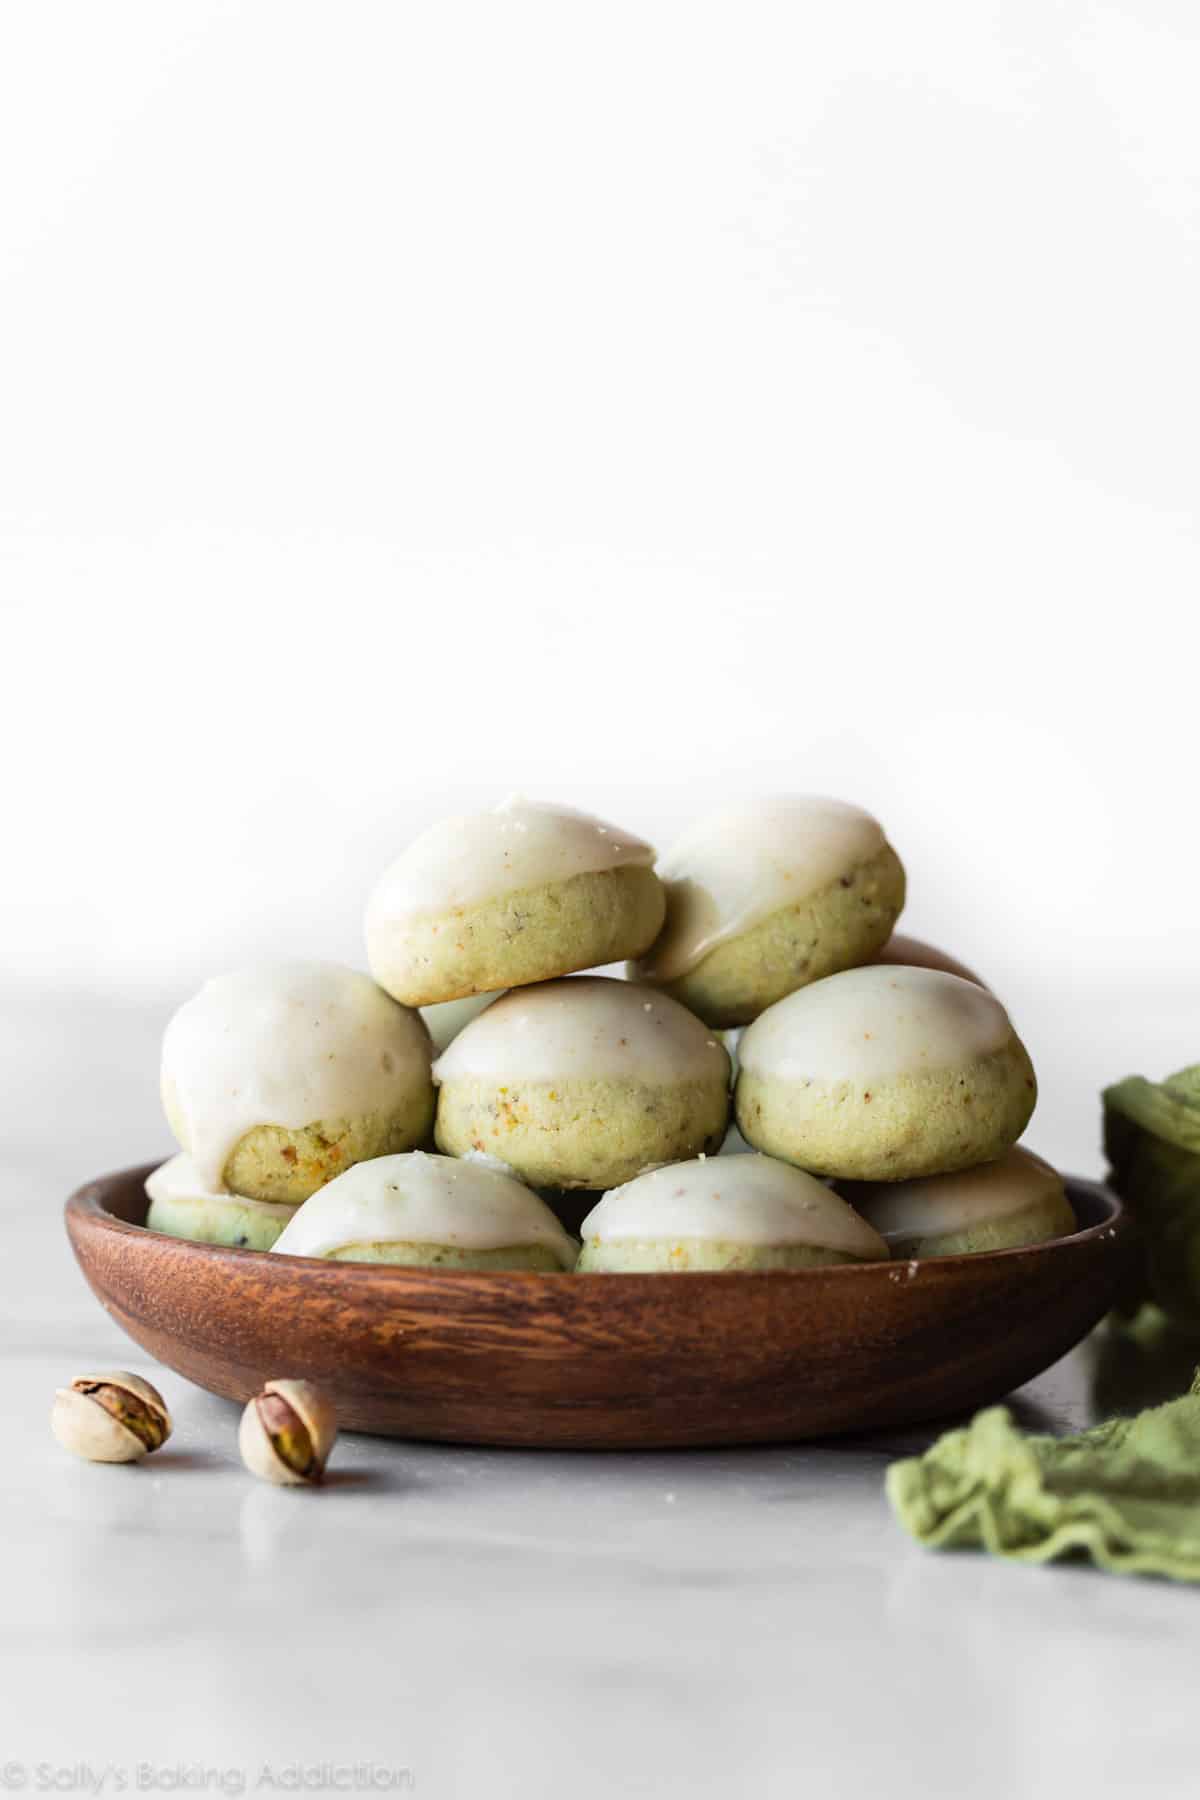 Pistachio drop cookies with brown butter icing on a wood plate